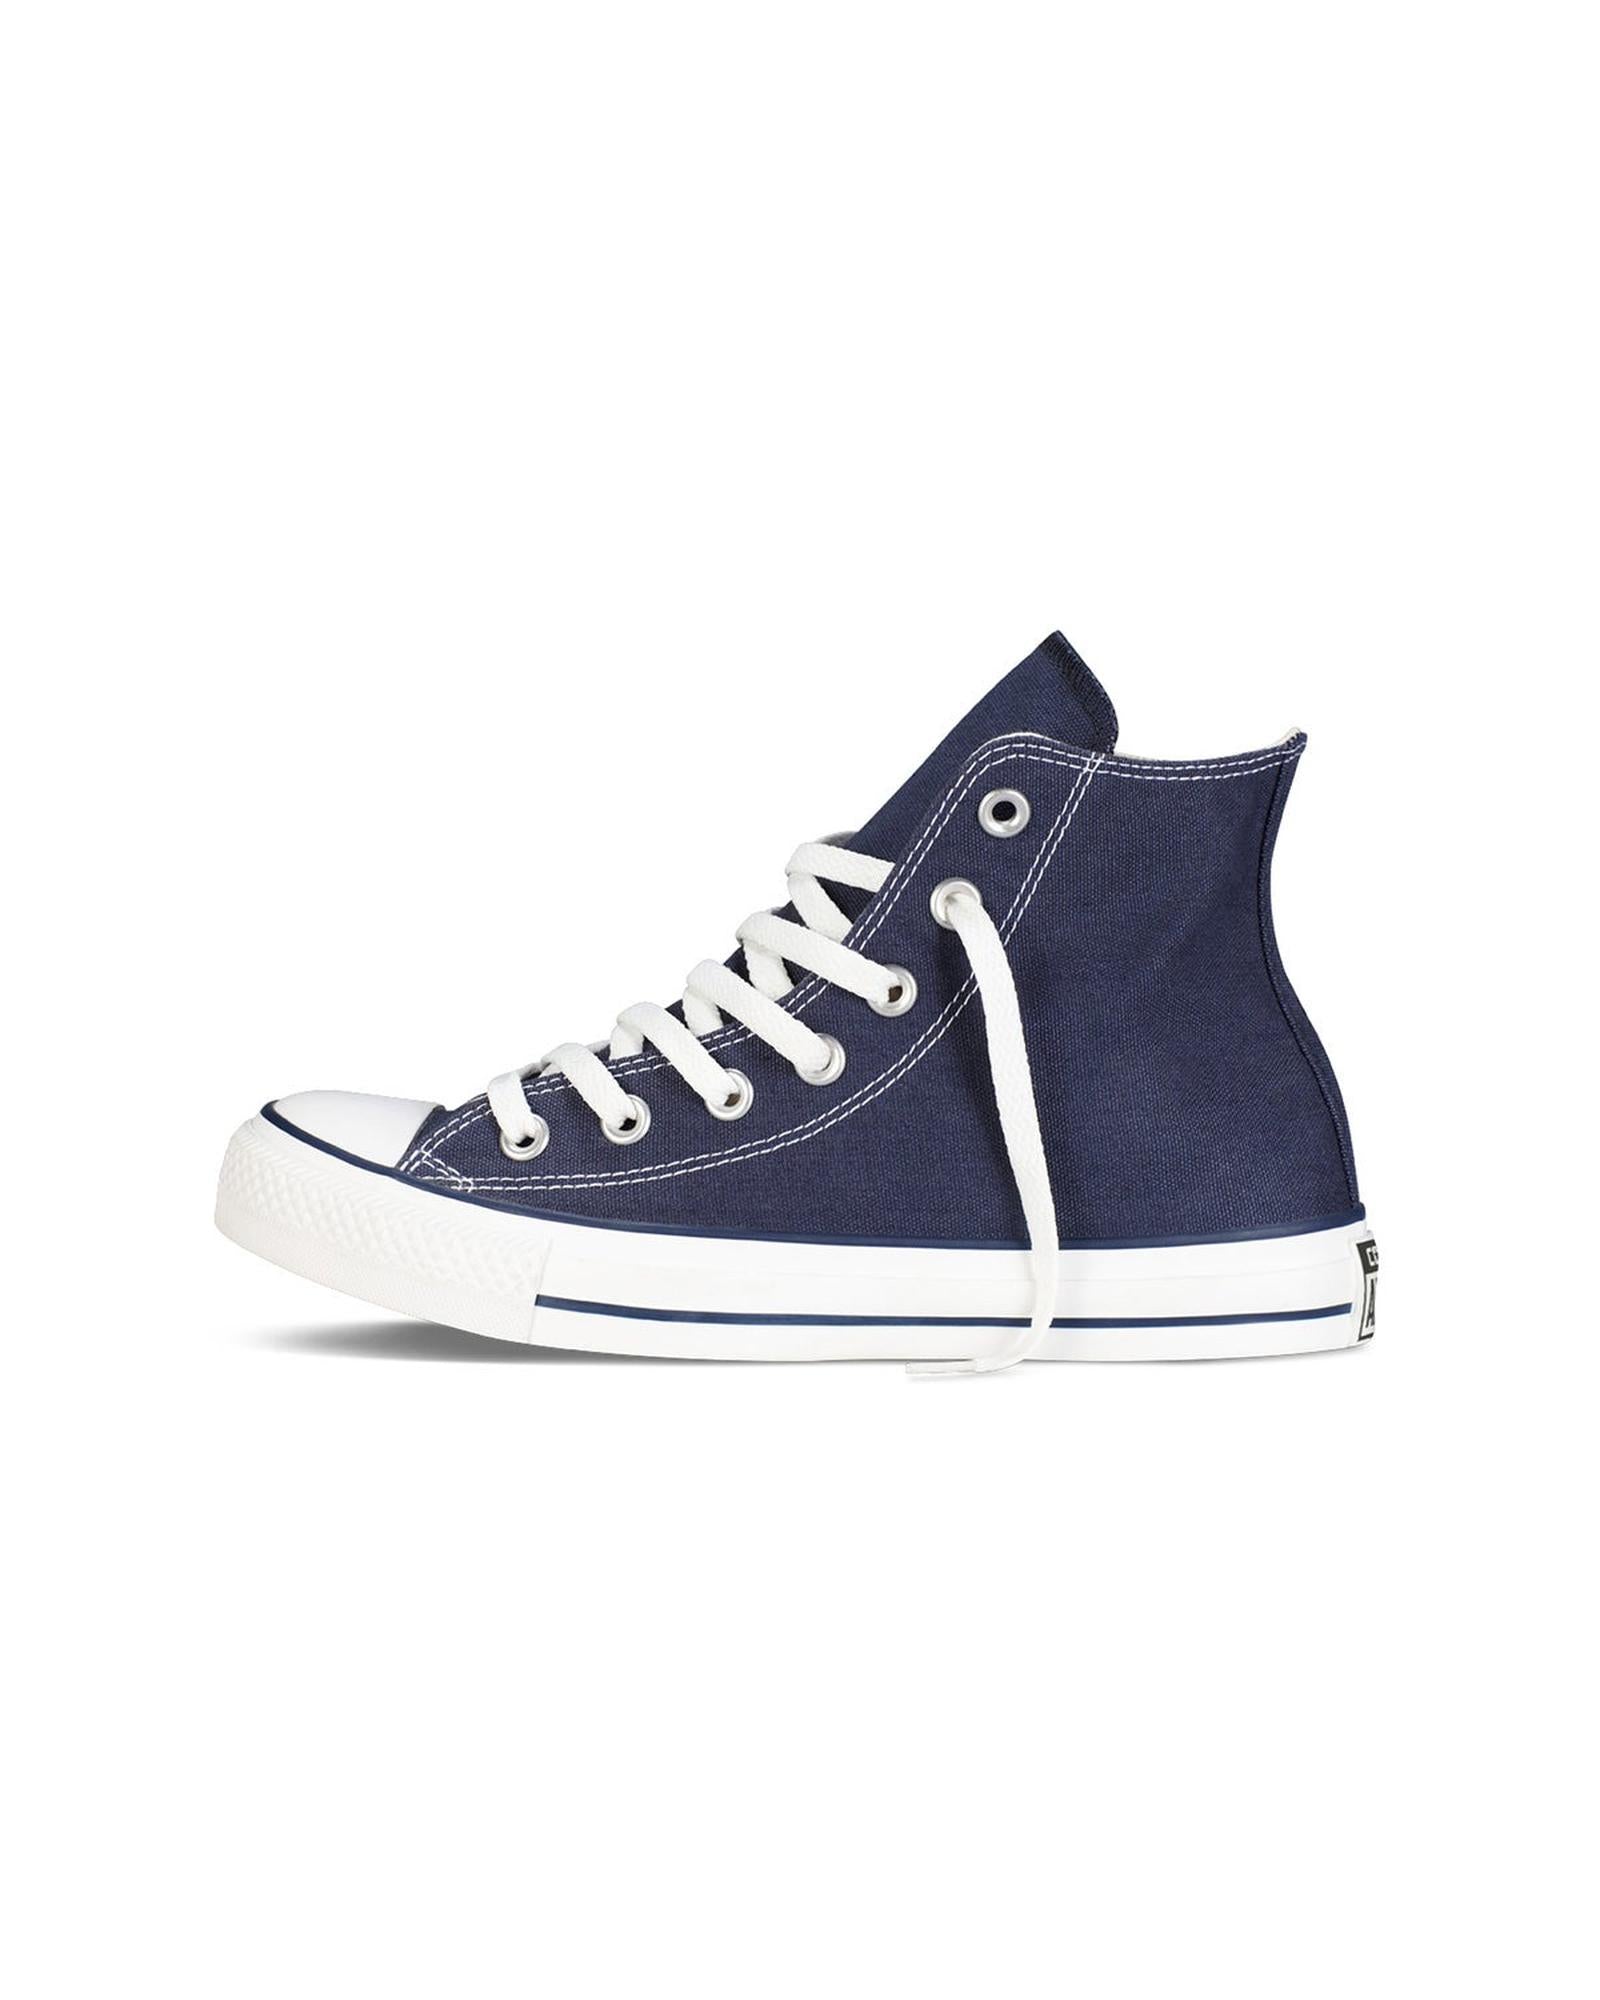 Classic Canvas High-Top Sneaker - 8 US